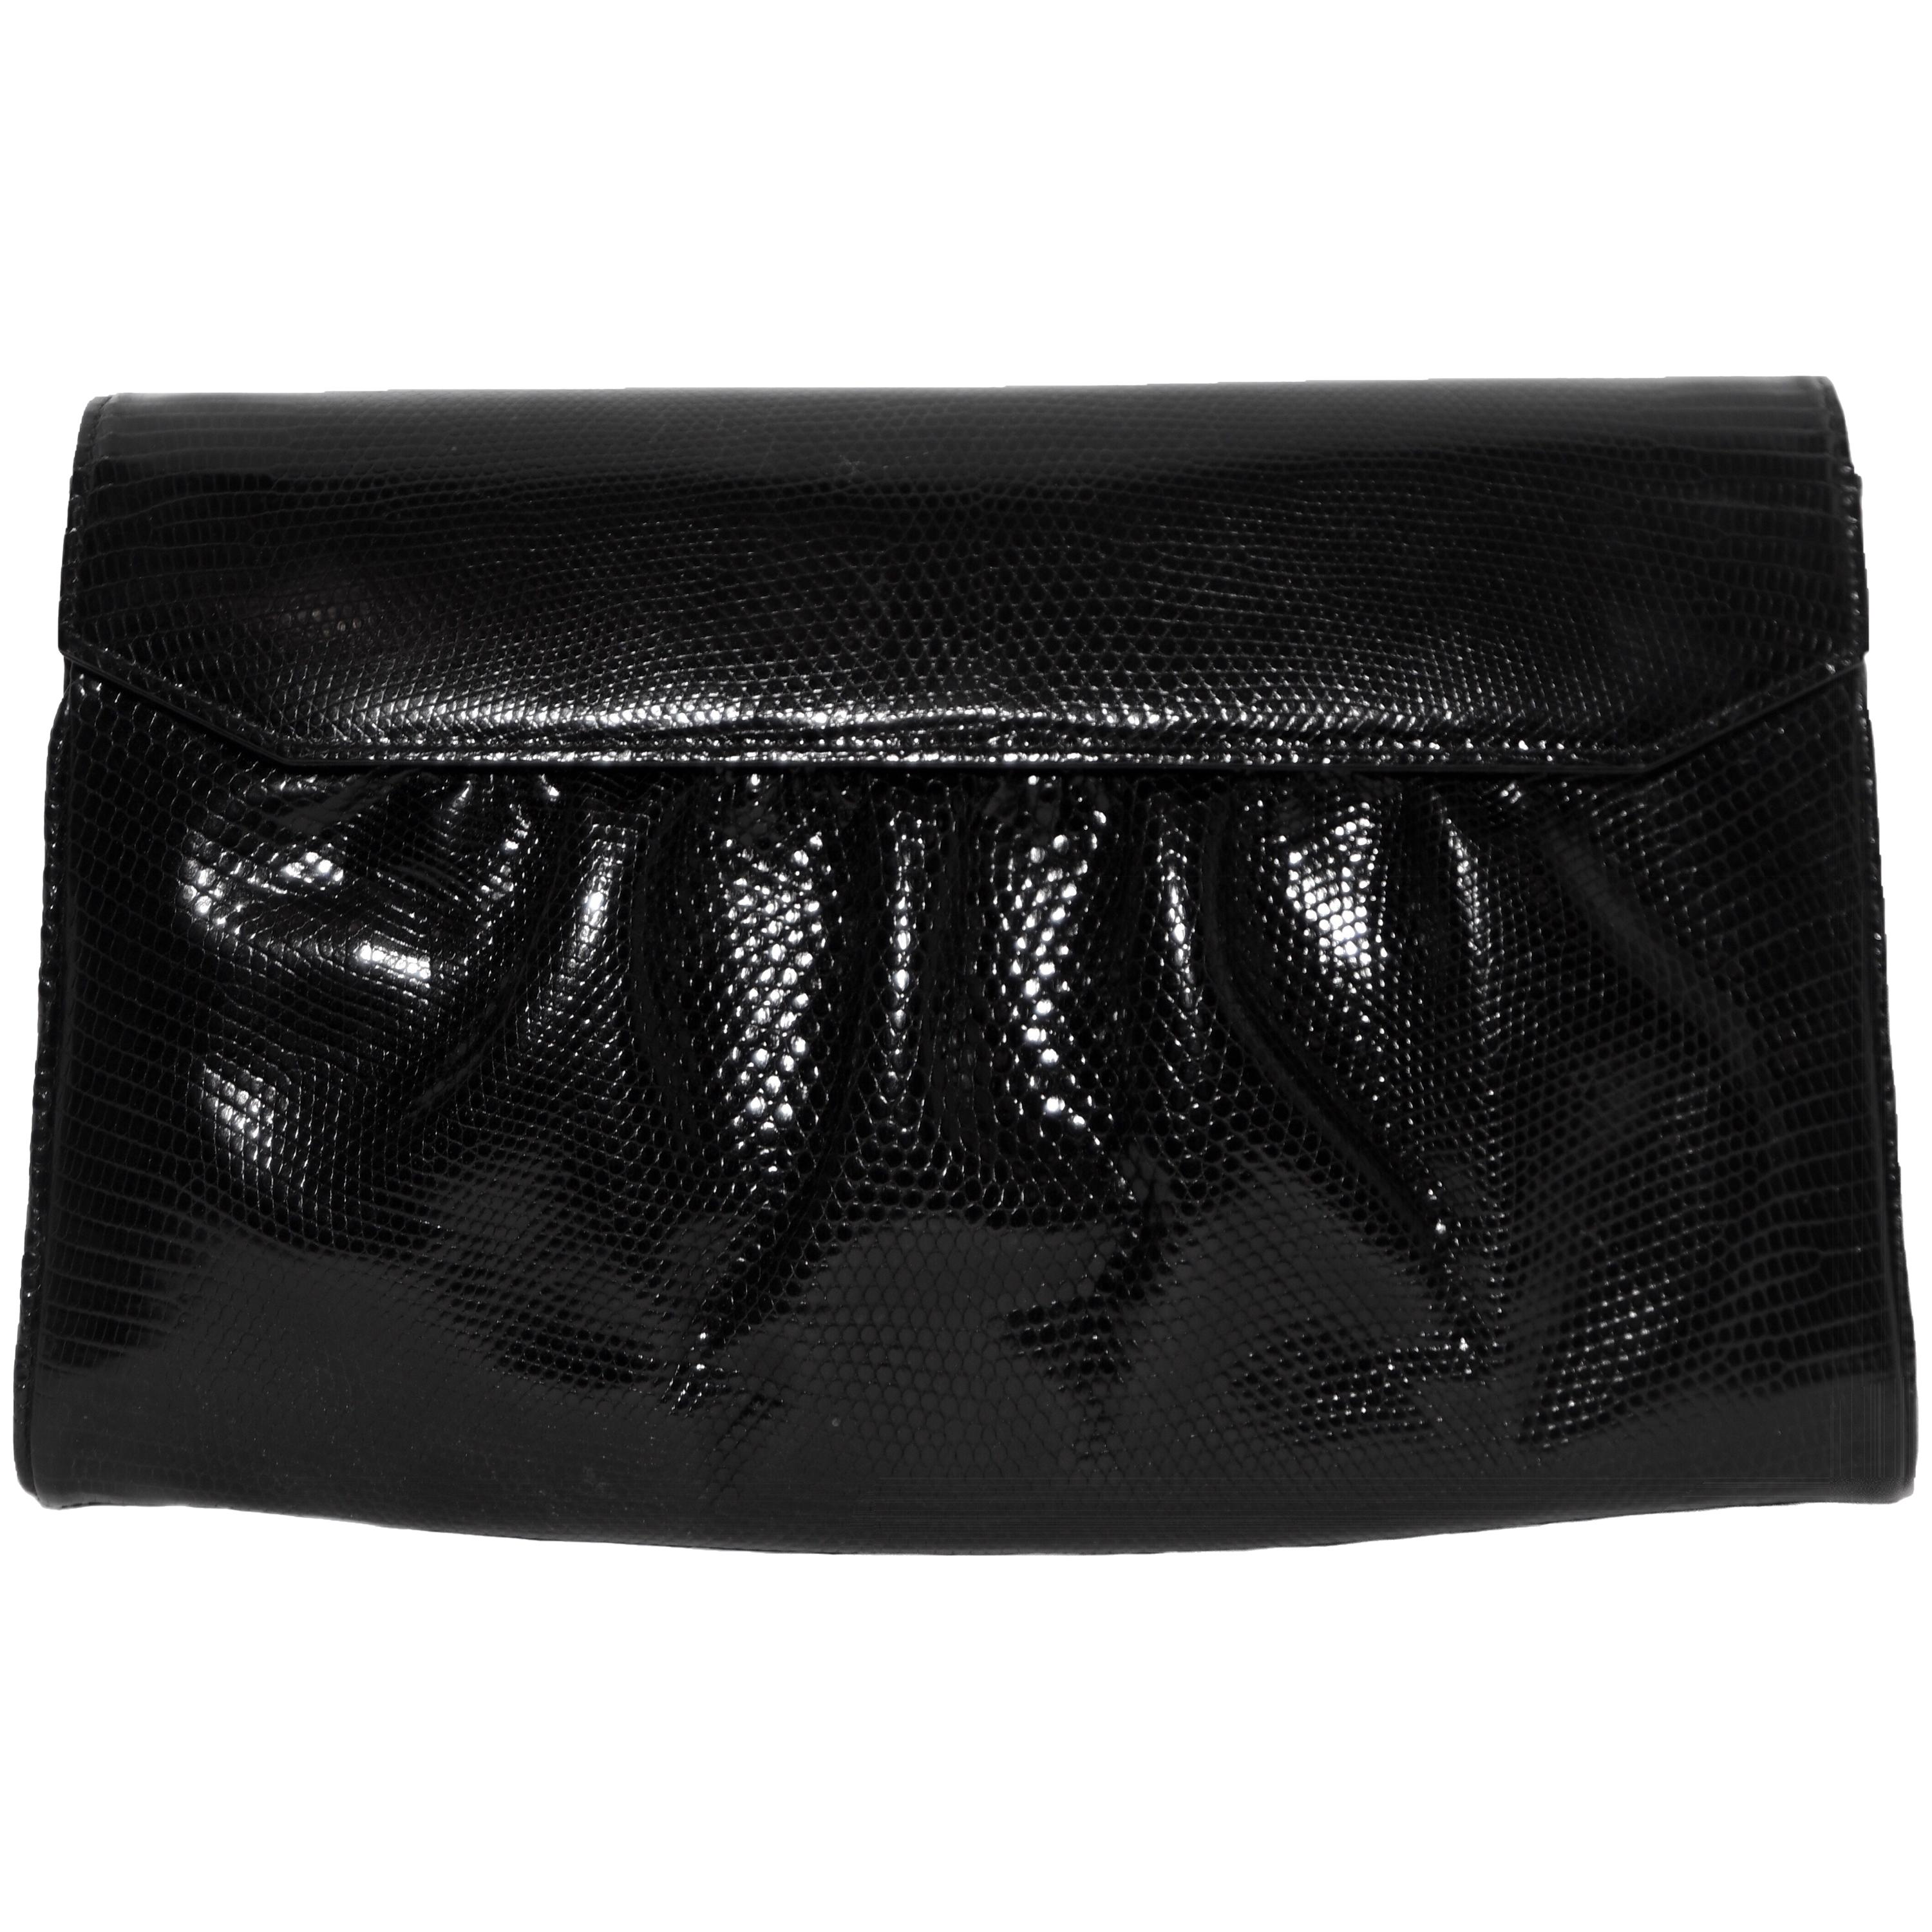 Gucci Black Embossed Leather Envelope Accordion Clutch Bag 